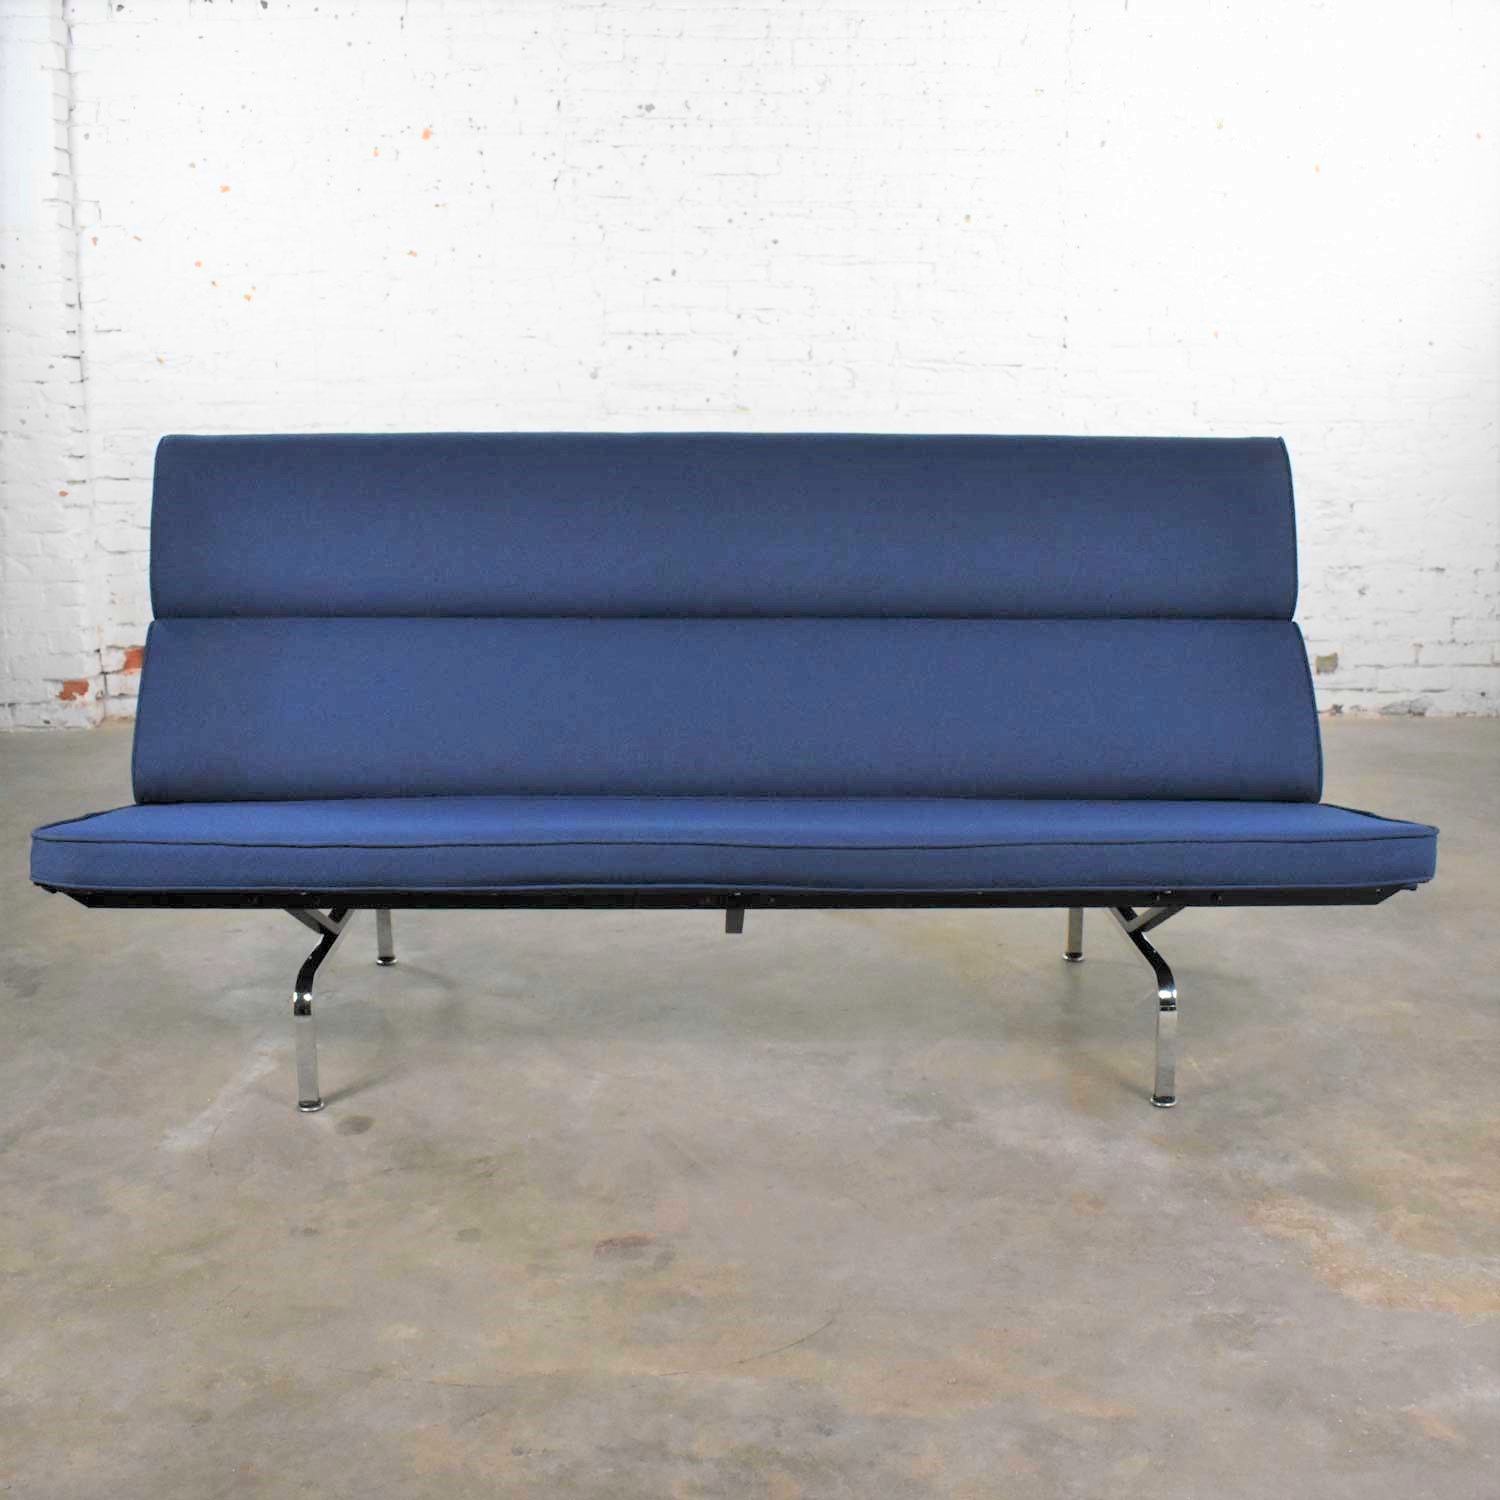 Vintage Mid-Century Modern Eames Sofa Compact in Blue by Herman Miller